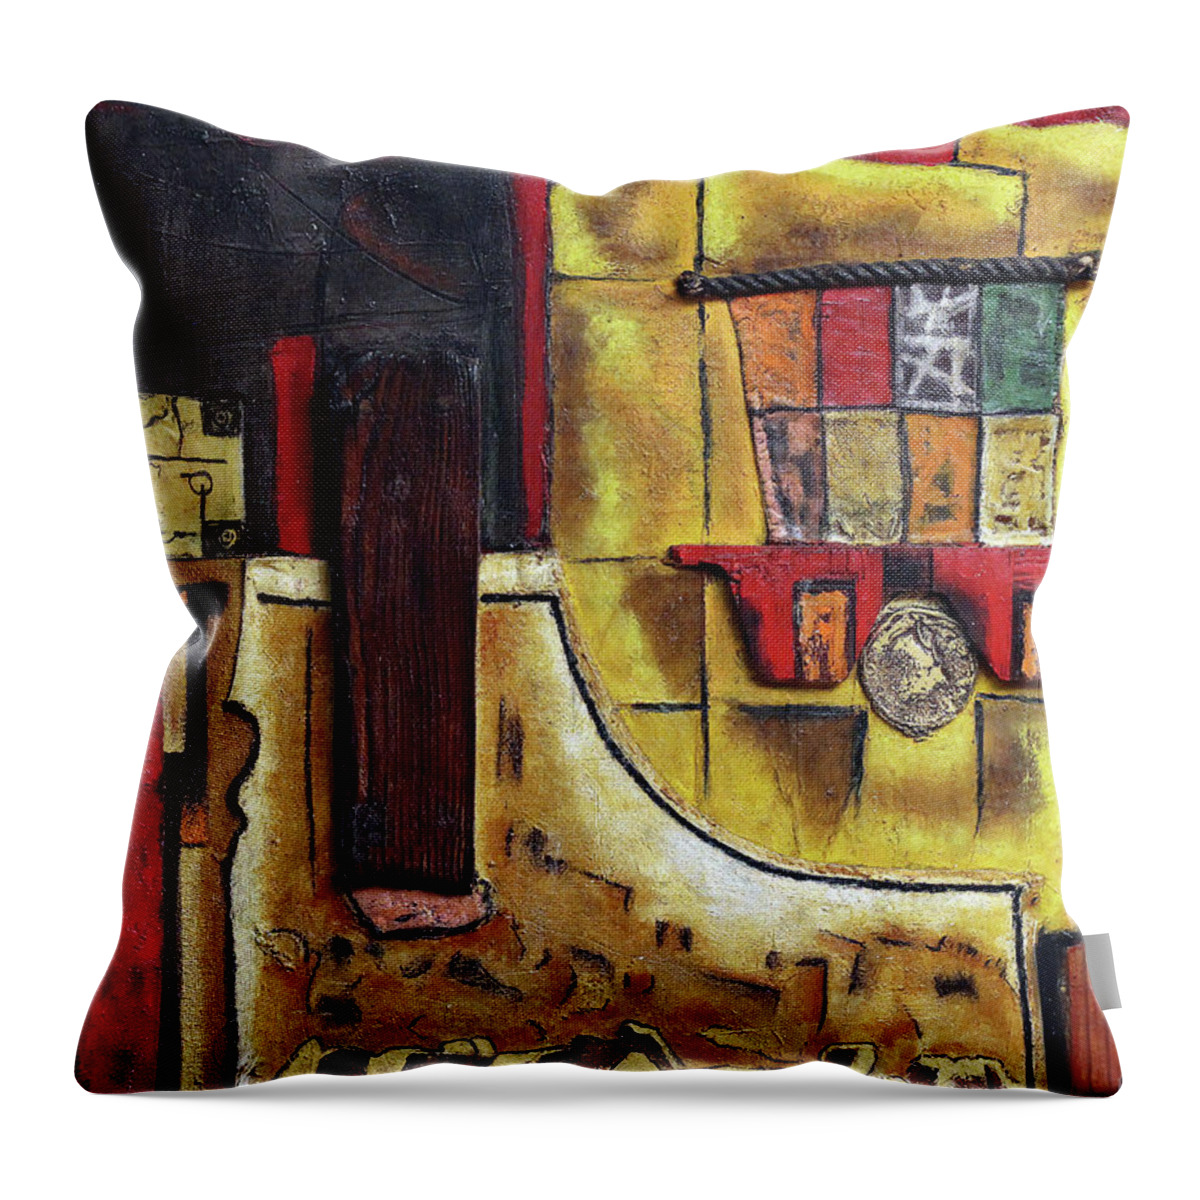  Throw Pillow featuring the painting Hitching A Ride by Michael Nene